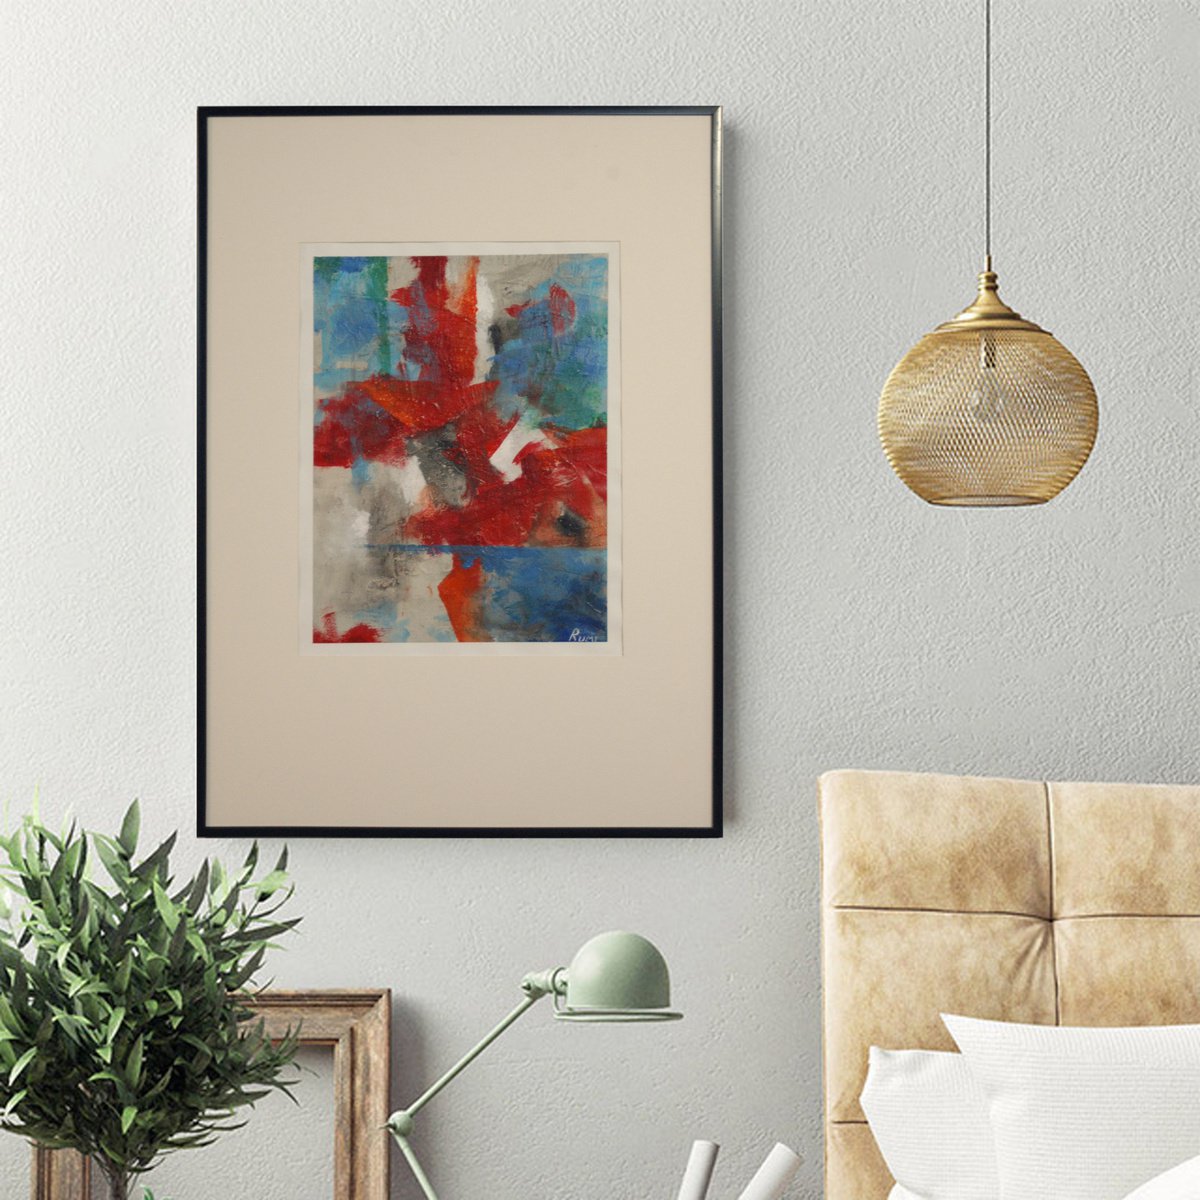 Abstract Variations # 76. Matted and framed. by Rumen Spasov